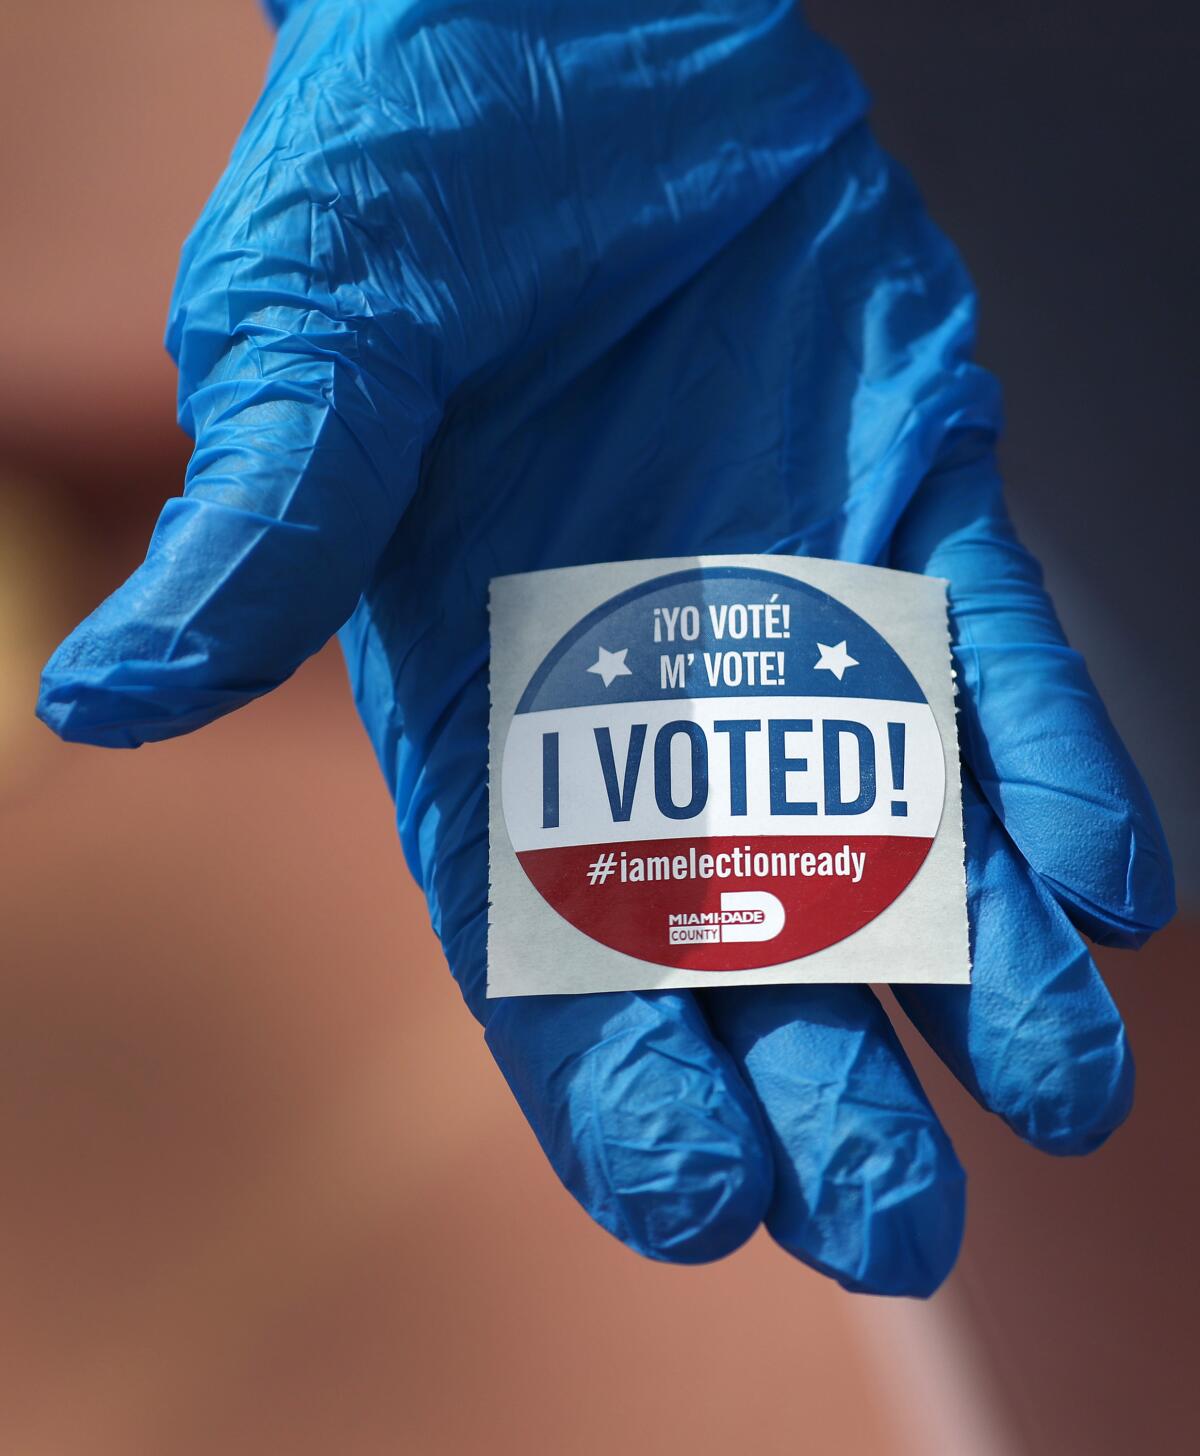 A voter wearing a glove holds an "I voted" sticker. 